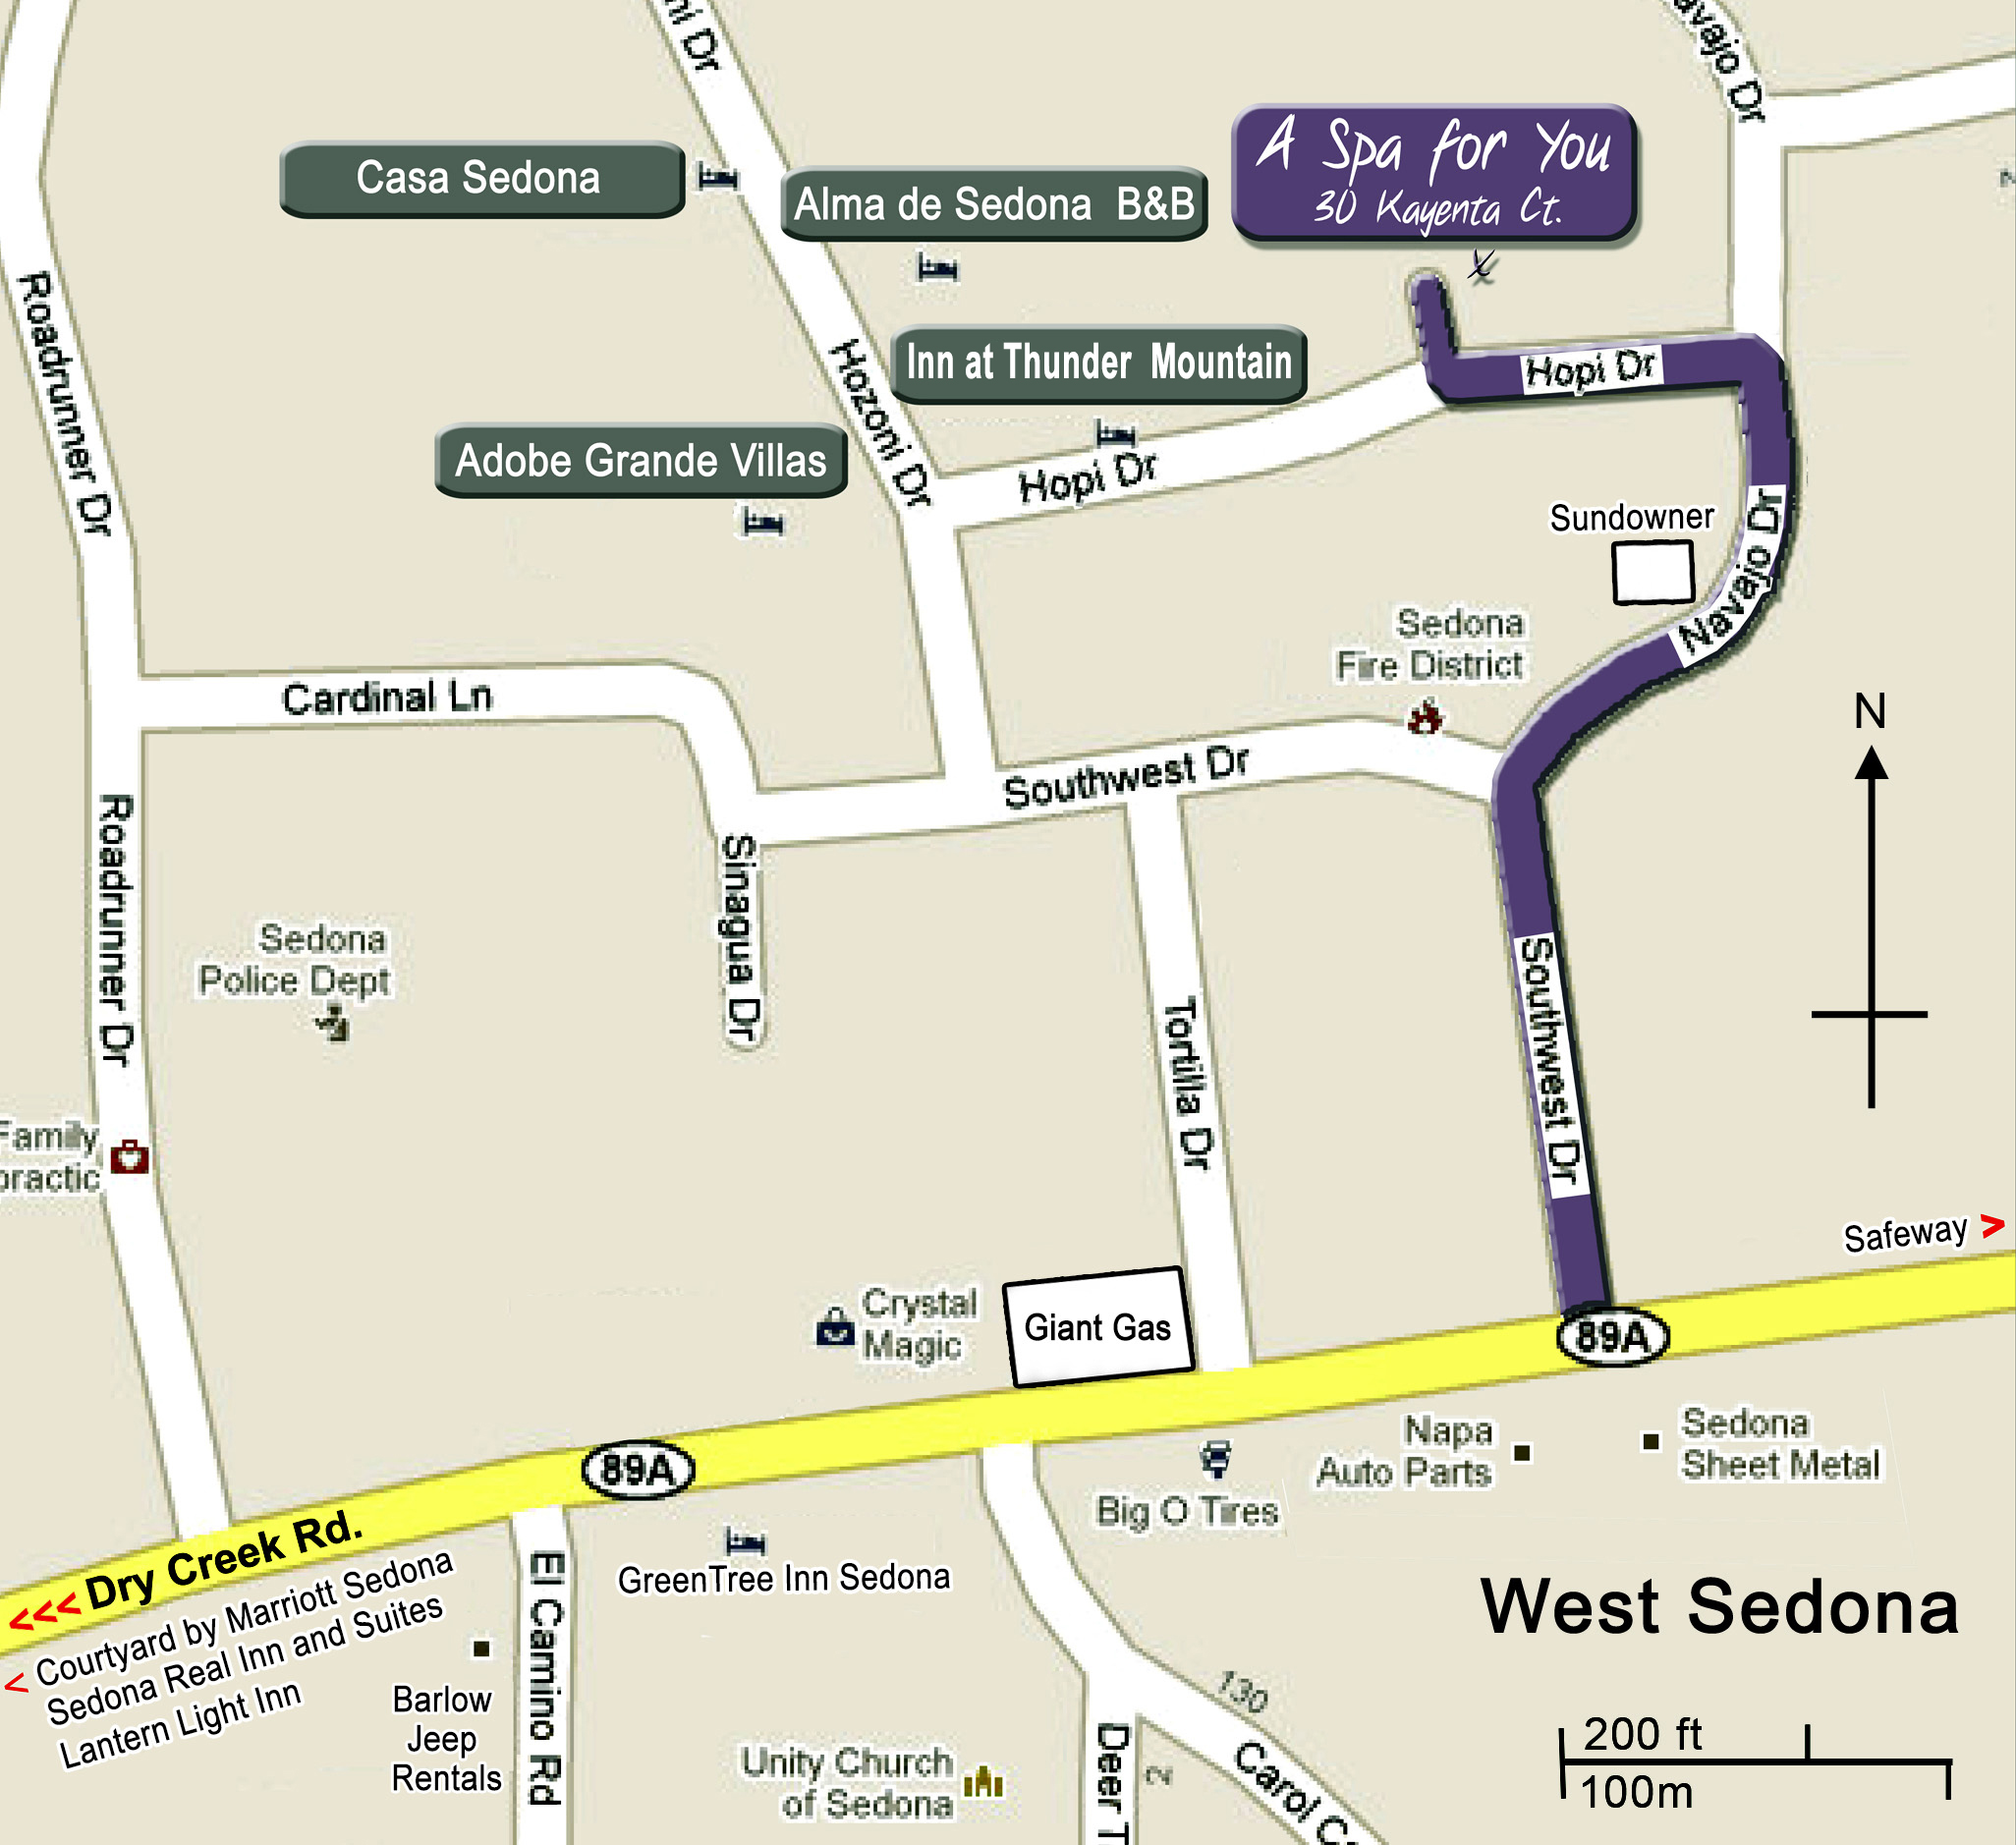 A Spa For You Sedona Day Spa & Massage Location Map